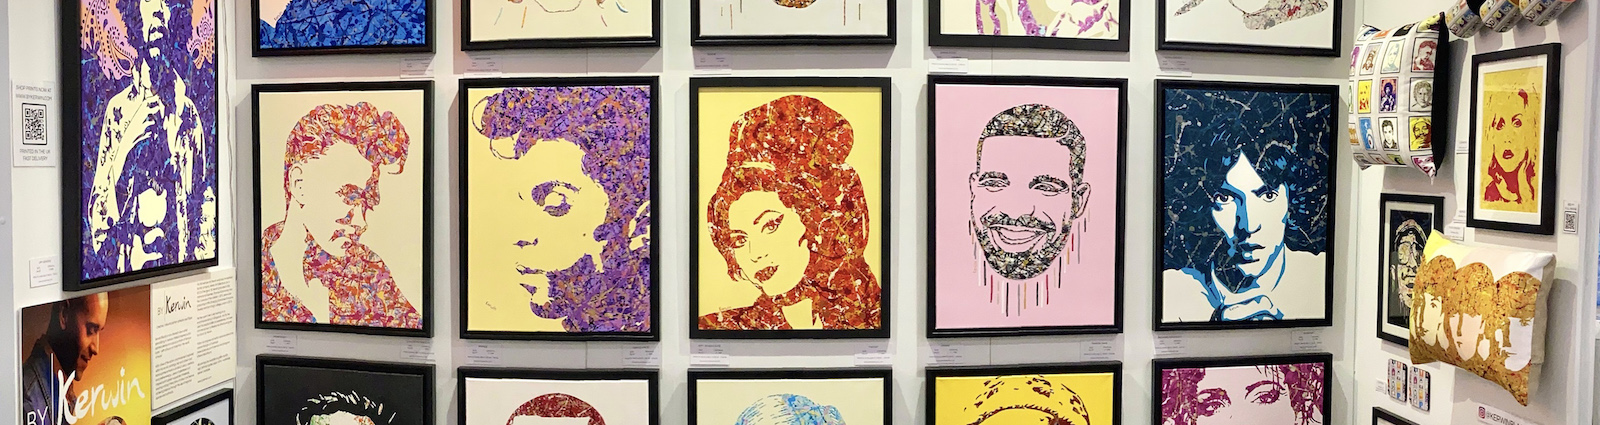 What Are 5 Characteristics to Identify Pop Art? By Kerwin Blog